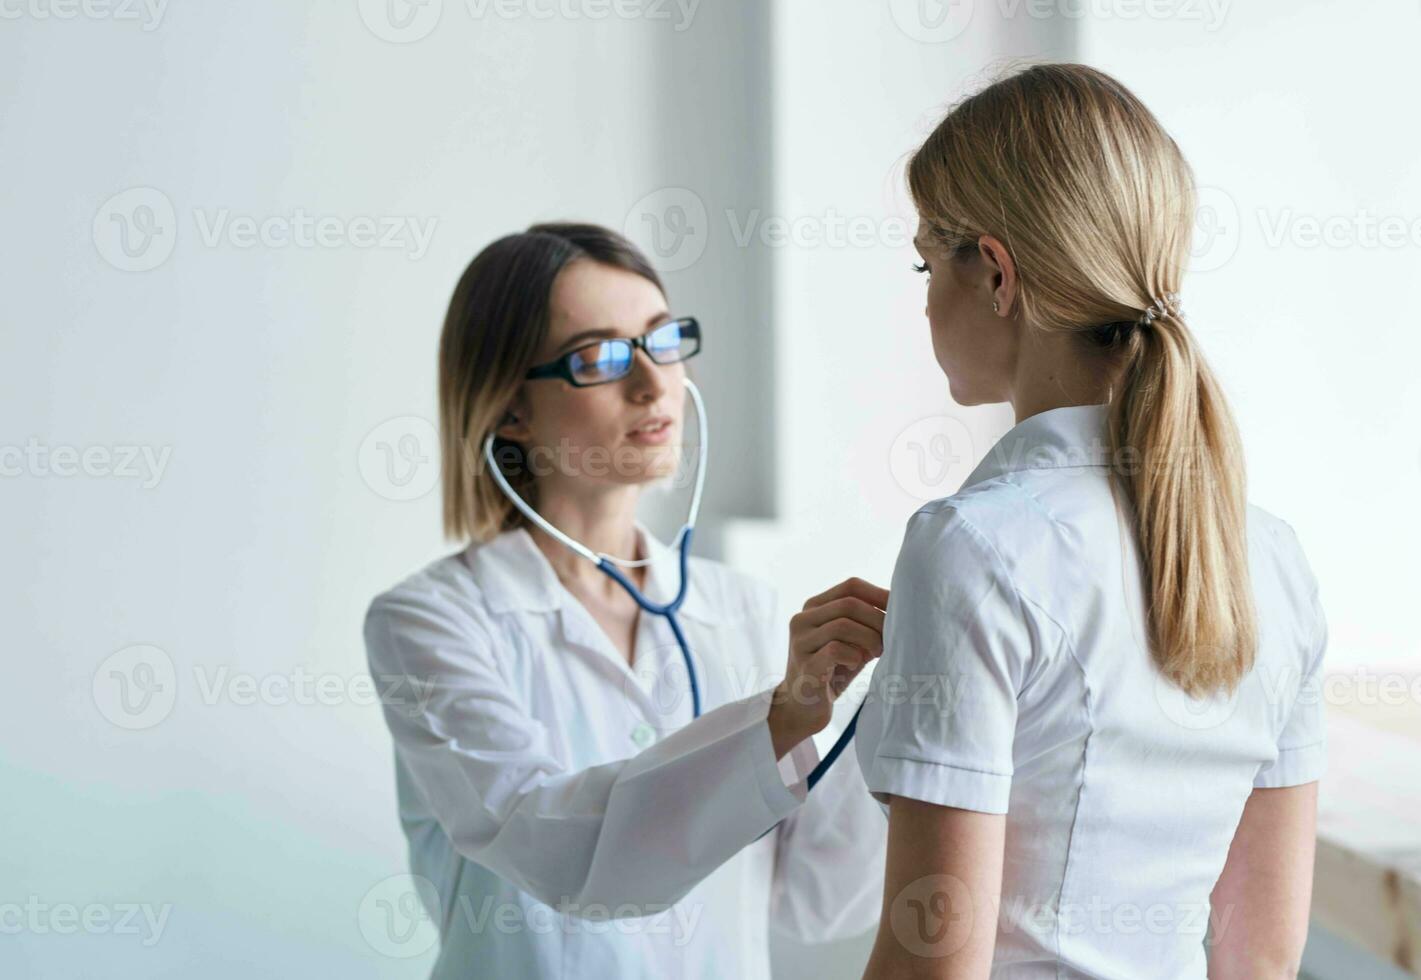 Woman doctor with stethoscope and glasses examines the patient health model photo